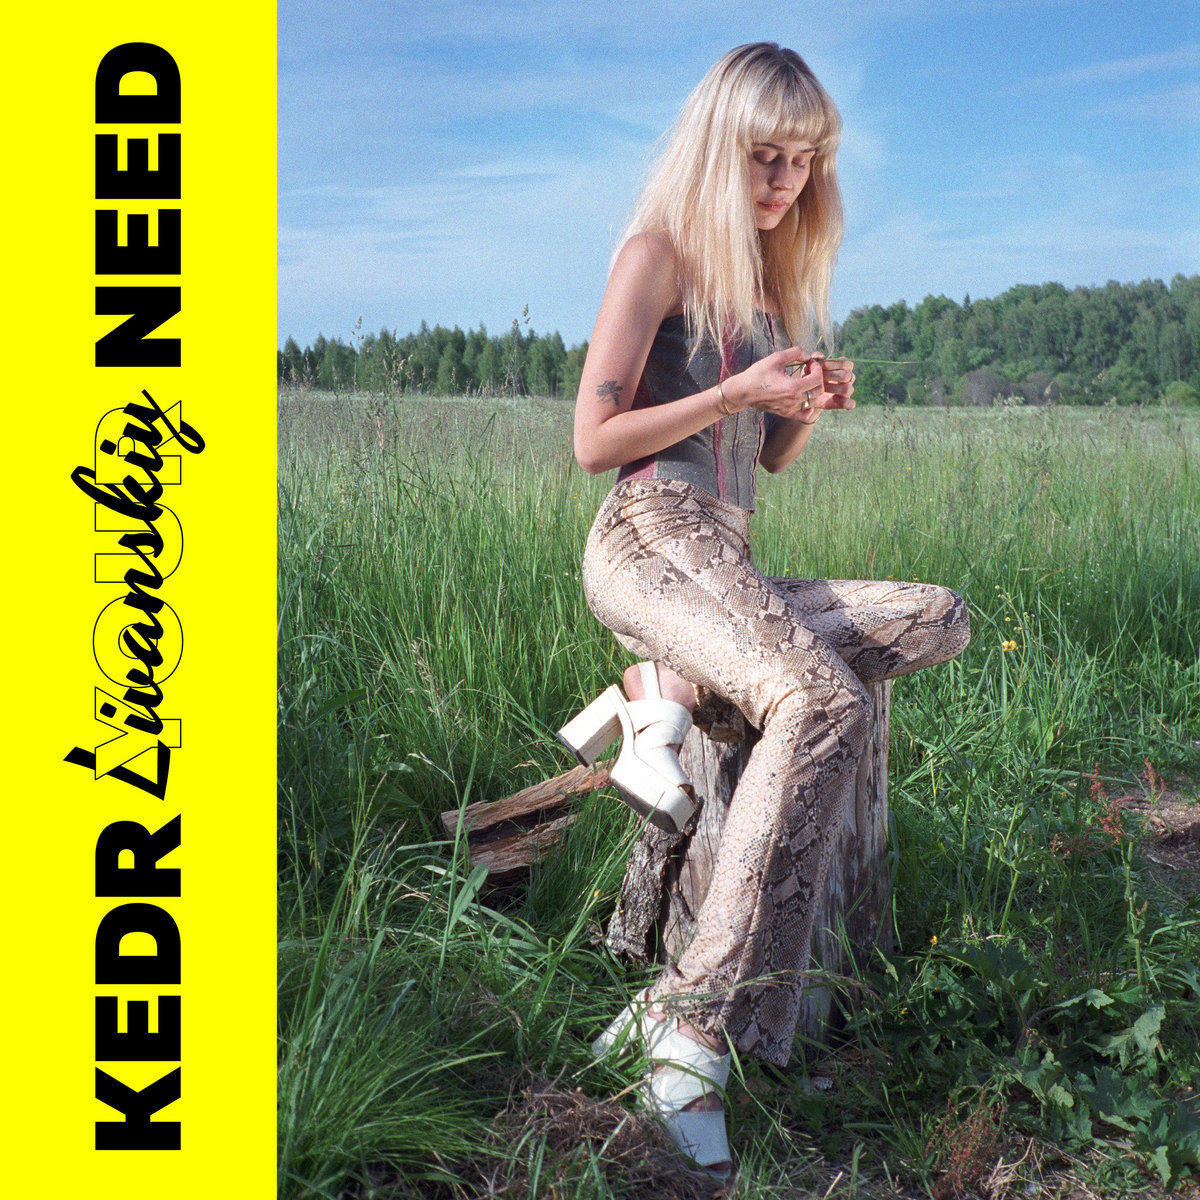 Happy 5th anniversary 'Your Need' by @KedrLivanskiyRU! What's your favorite track?